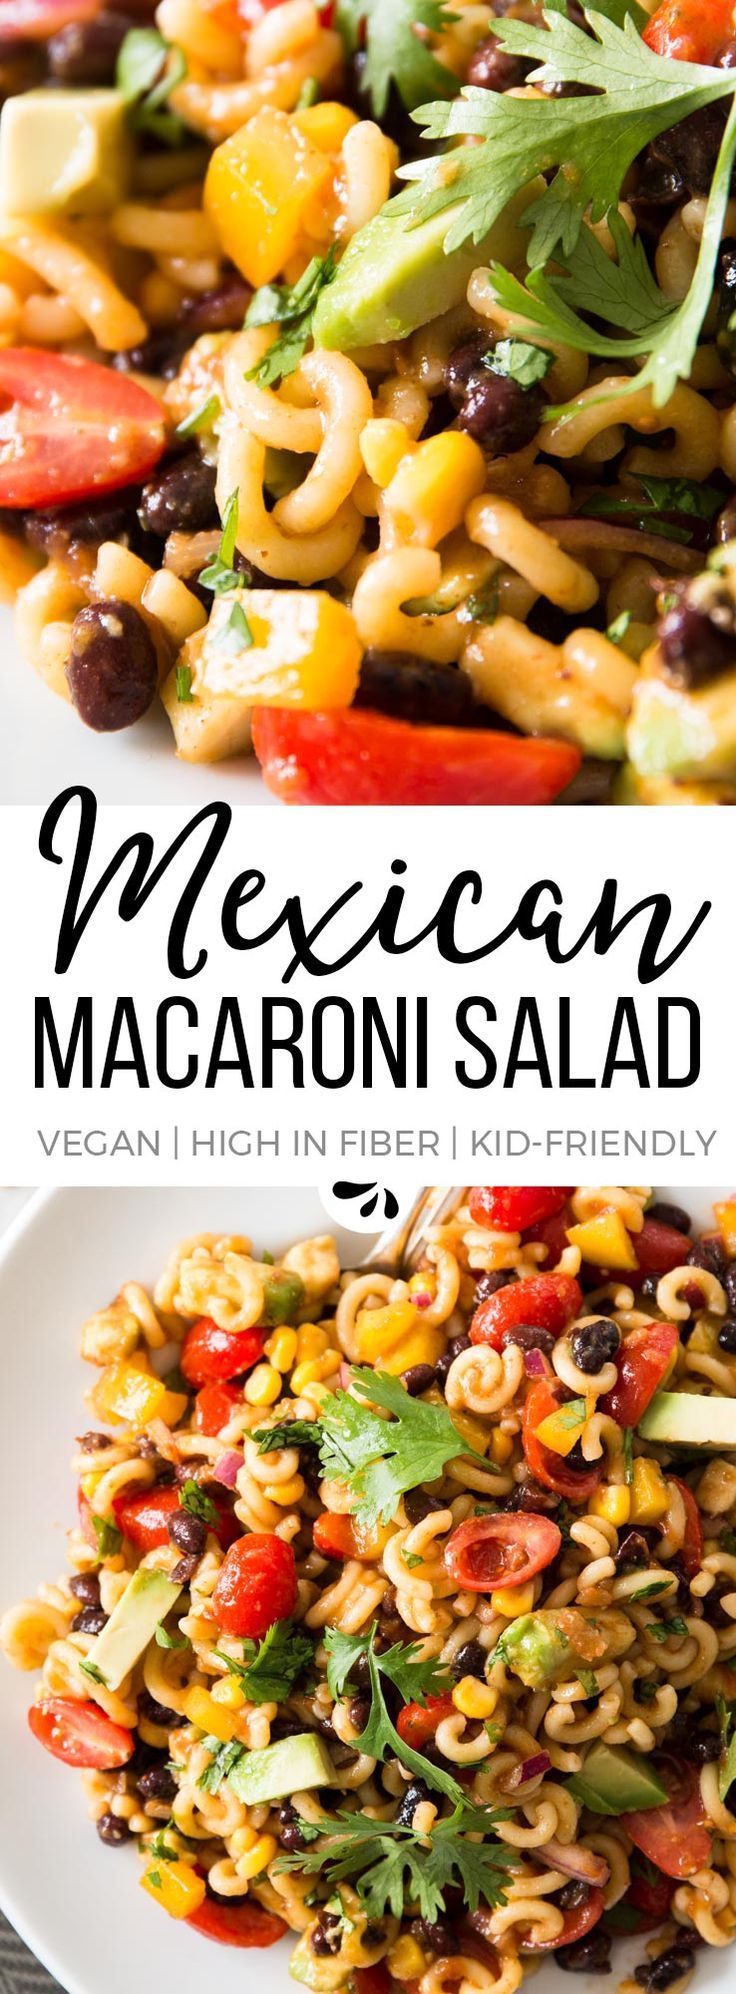 This Mexican Macaroni Salad is secretly healthy! Vegan, gluten free option and SO colorful! Make it for your next summer BBQ party